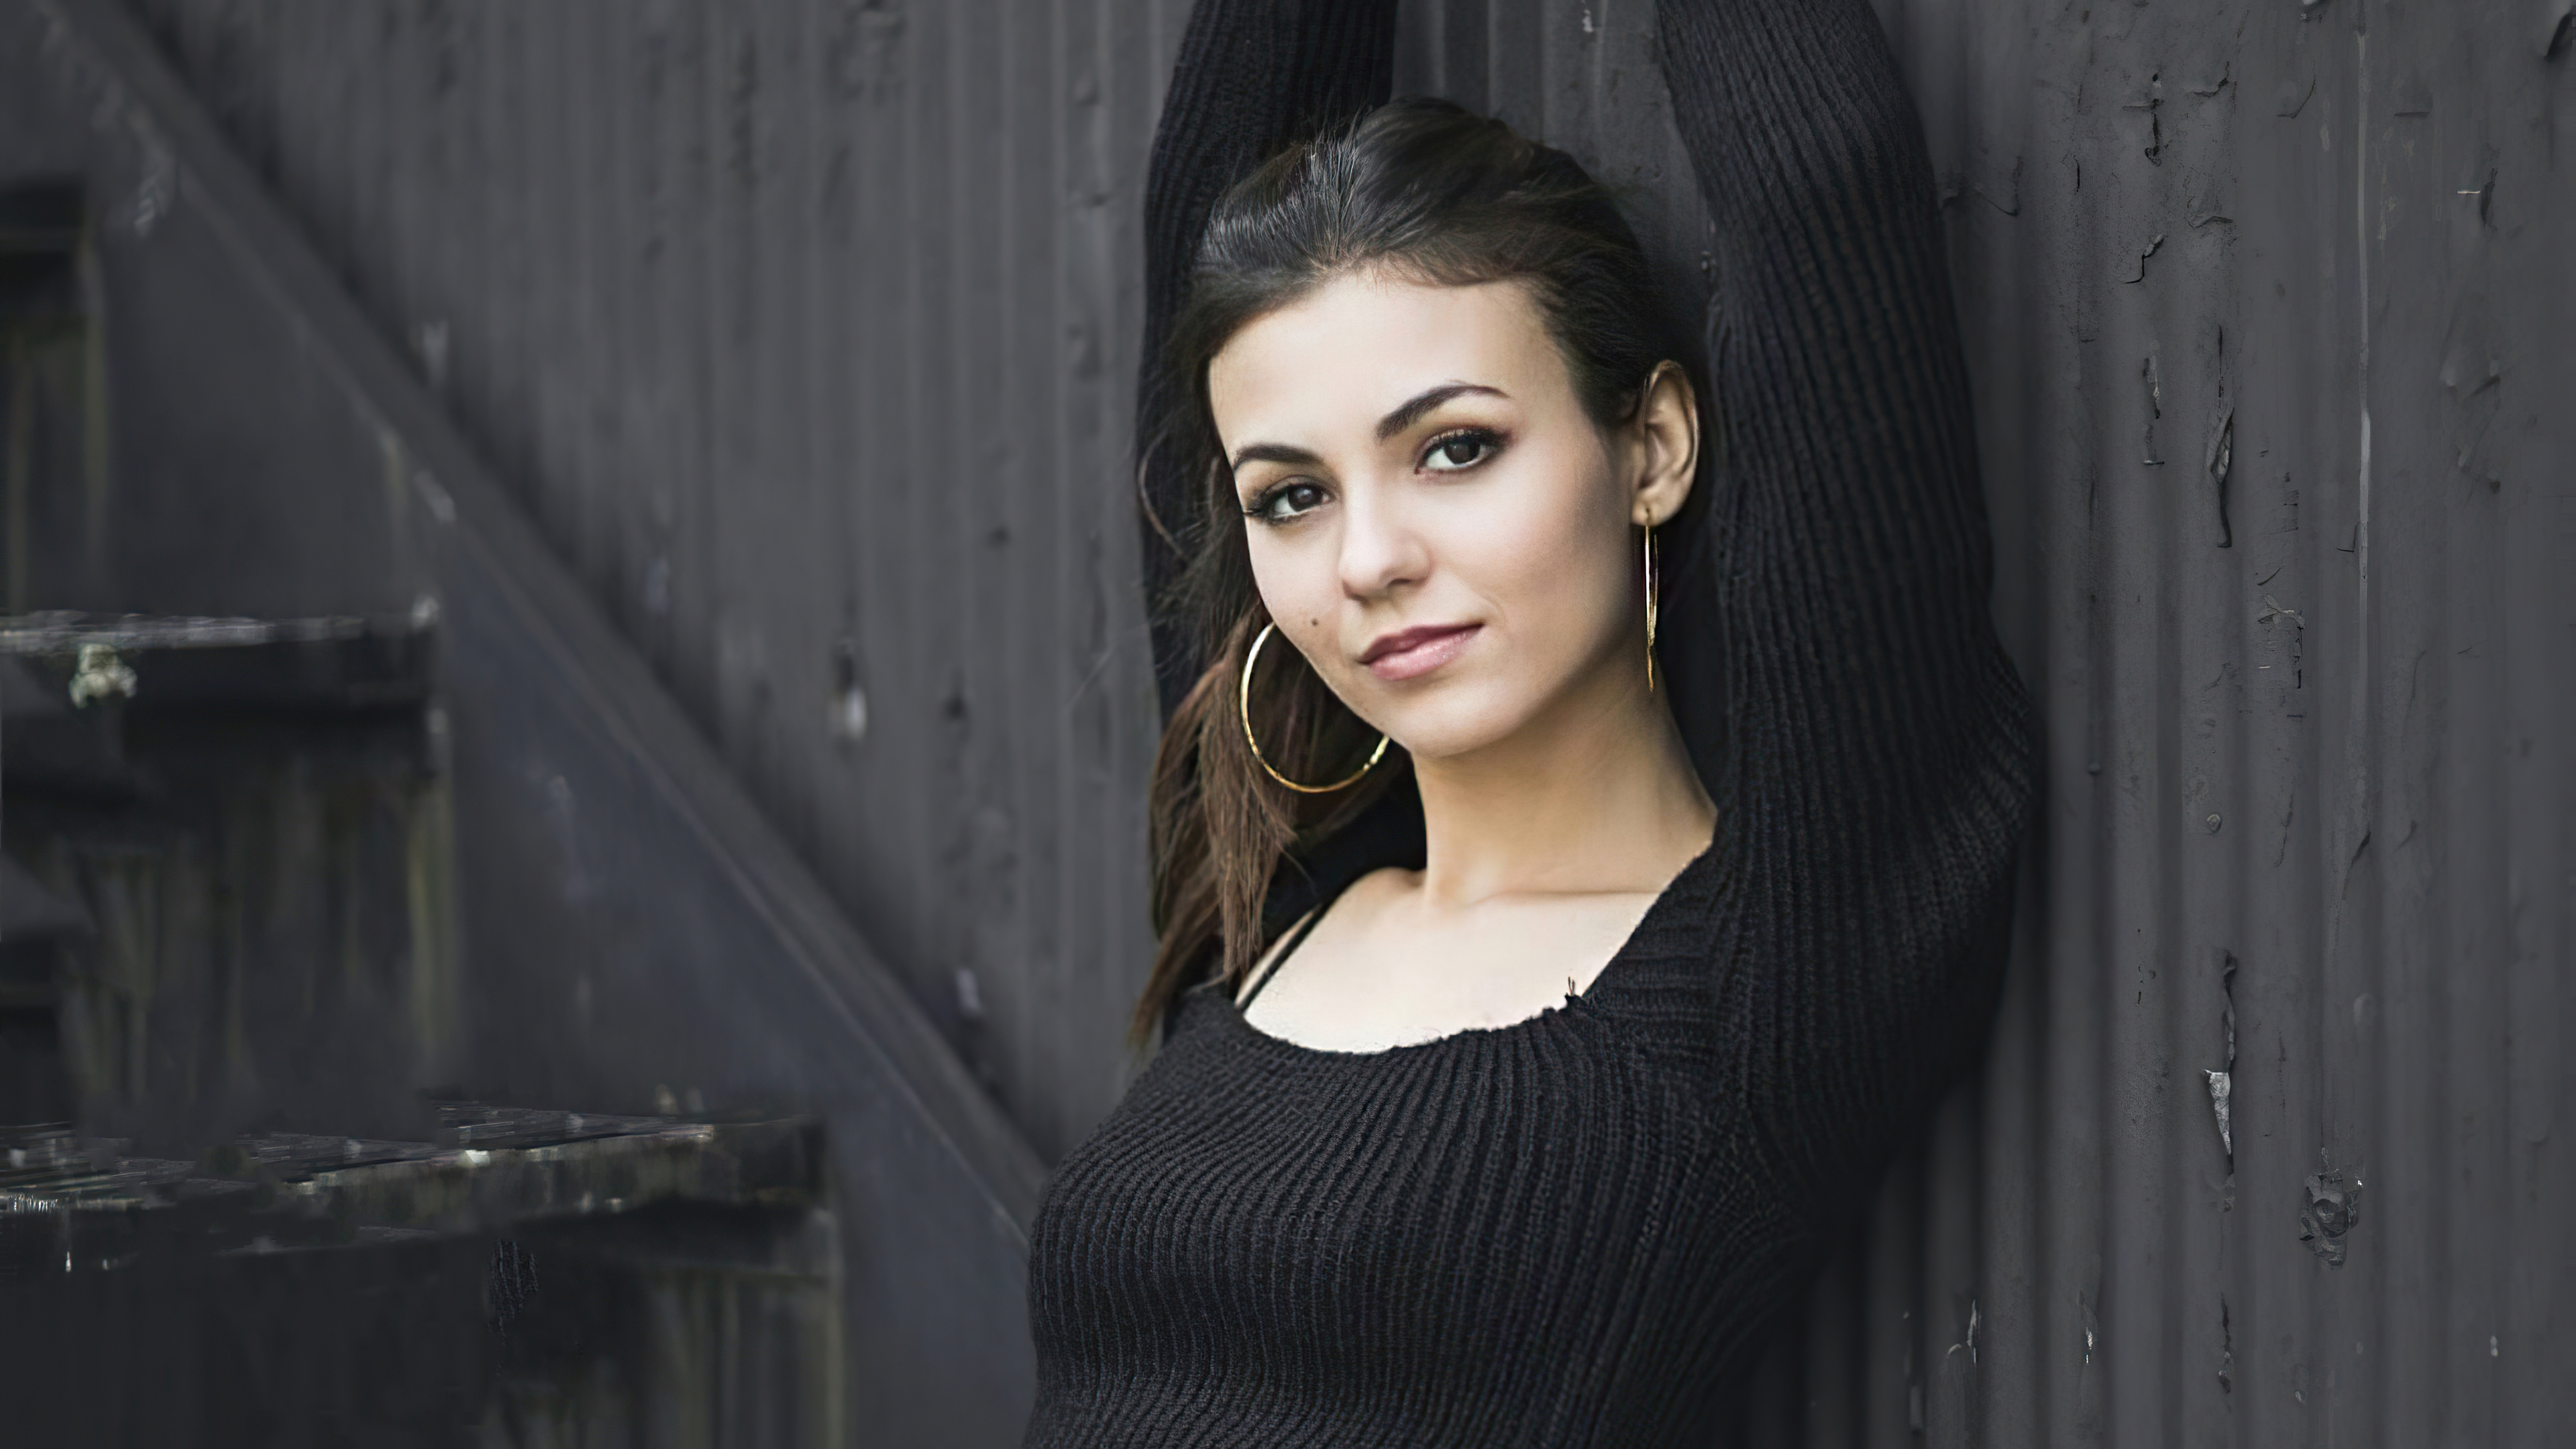 Wallpaper  Victoria Justice bench rest shirt jeans 1920x1080   wallhaven  1049770  HD Wallpapers  WallHere